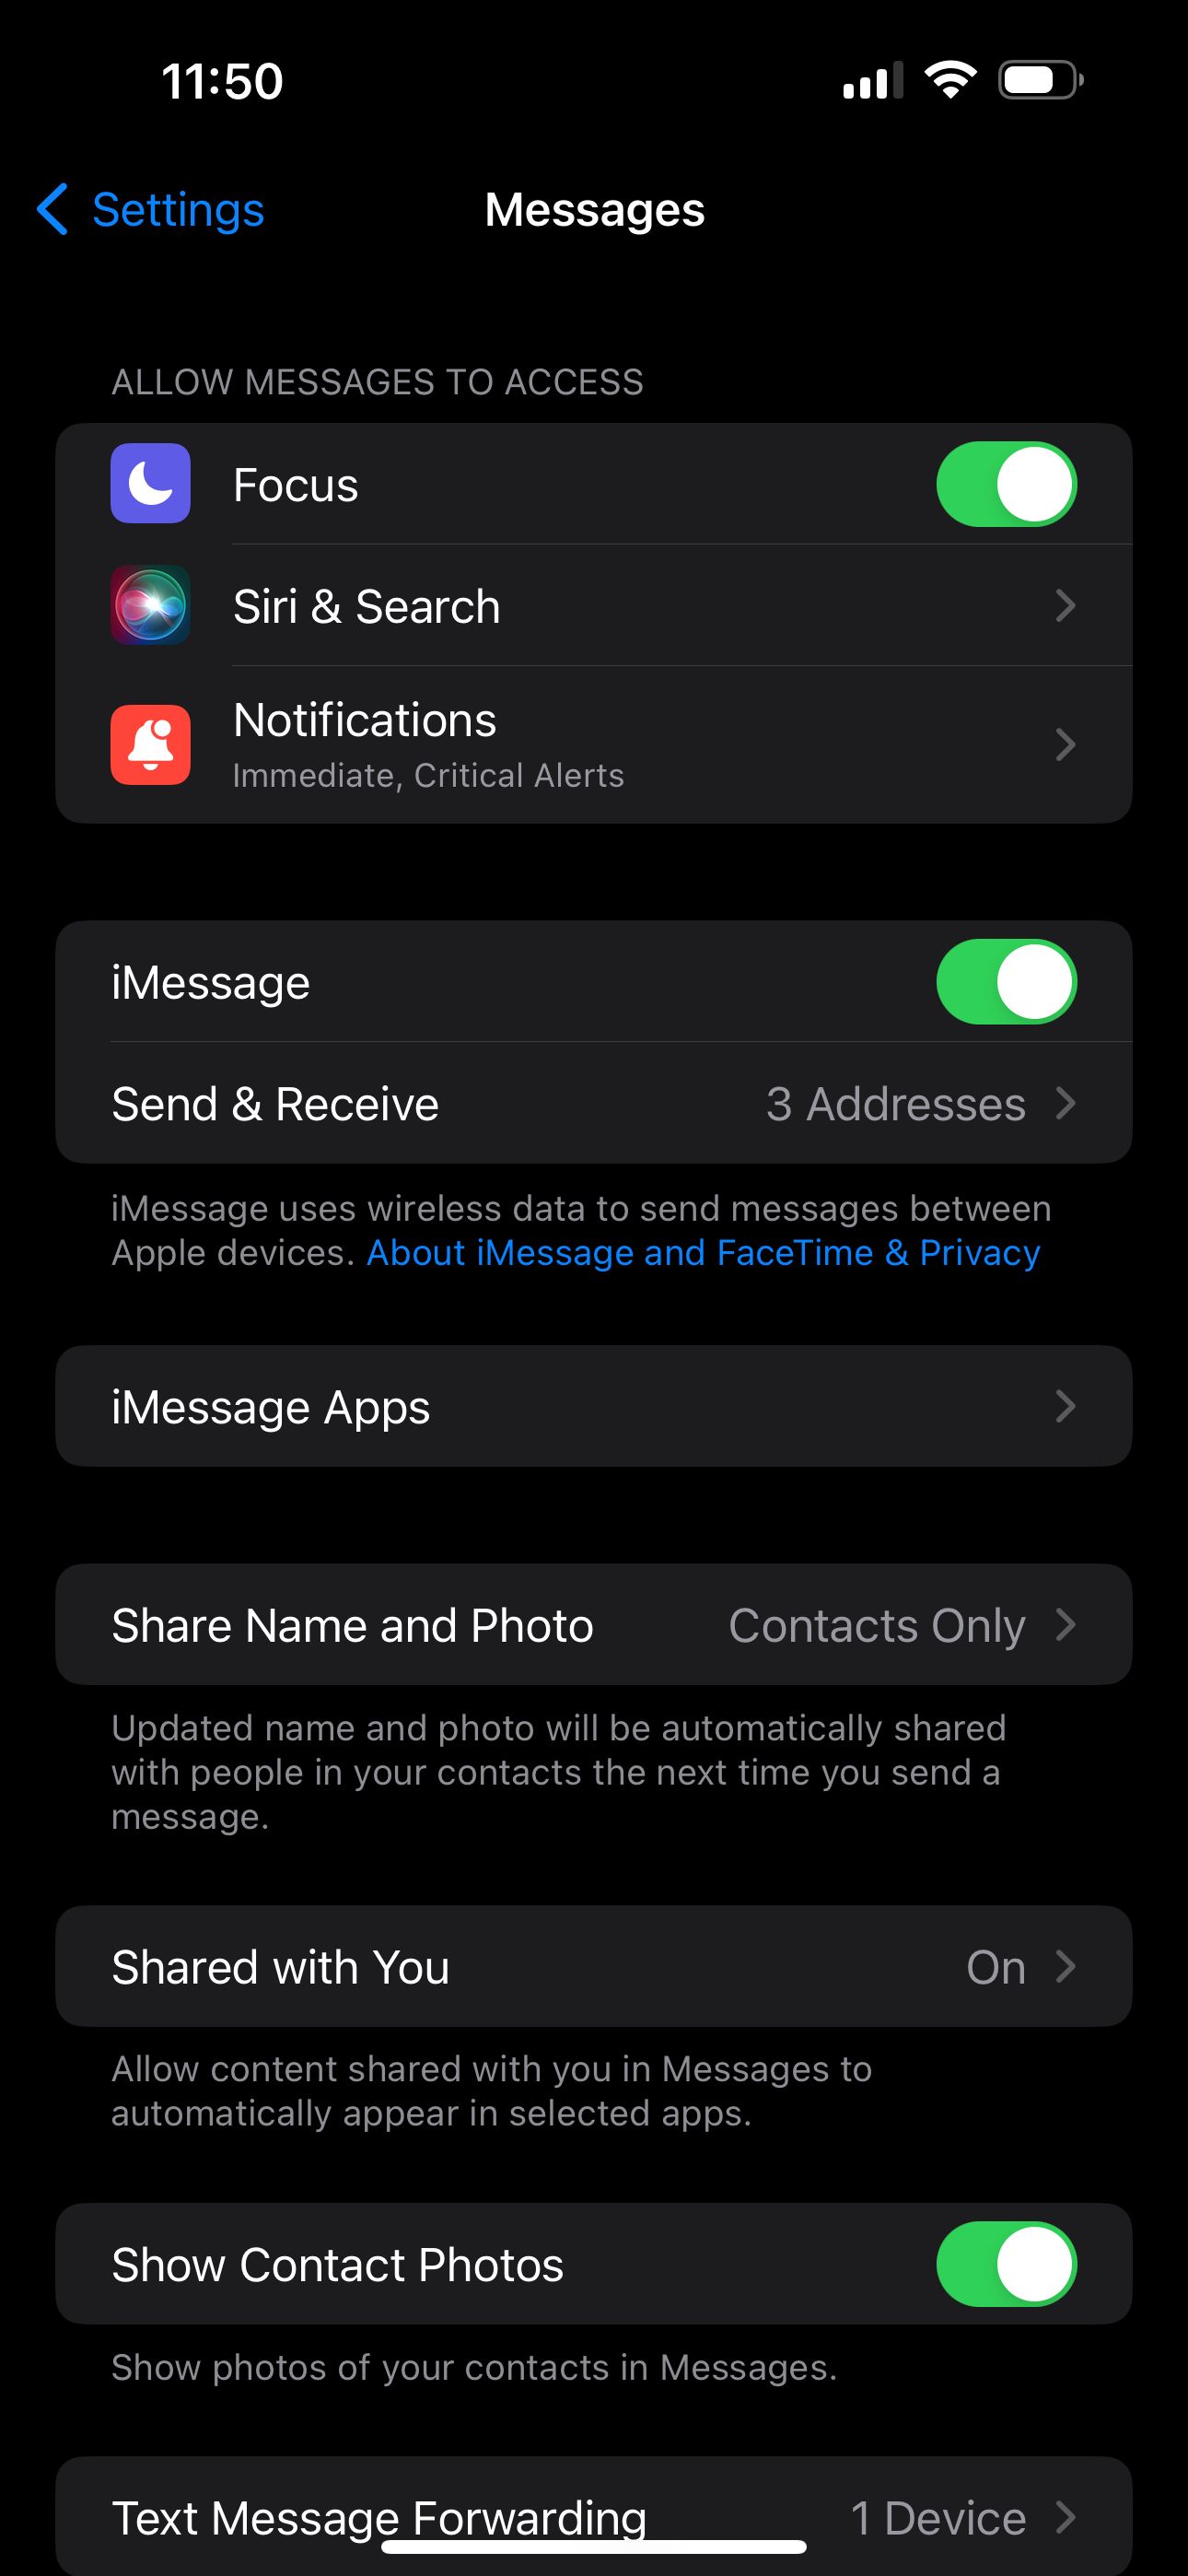 Settings menu for the Messages app in iOS